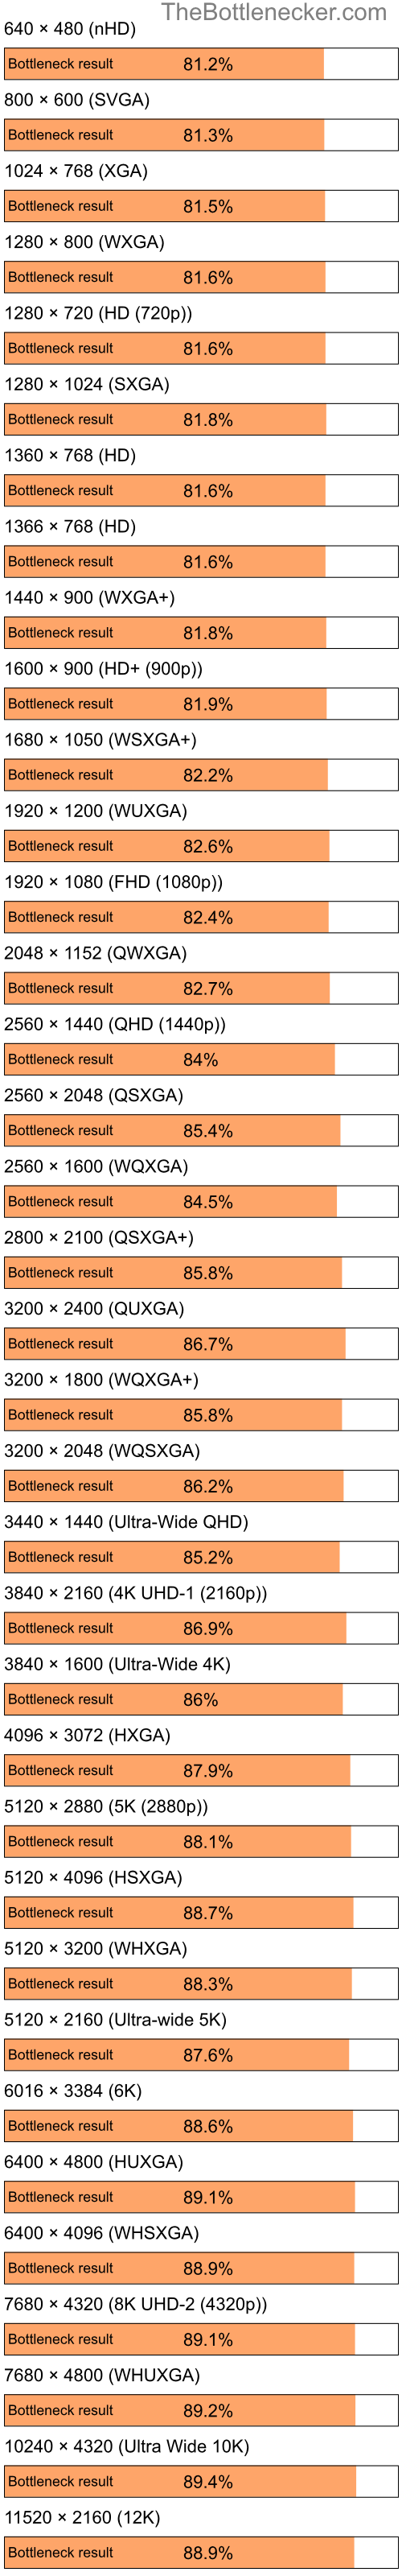 Bottleneck results by resolution for Intel Celeron M 420 and NVIDIA nForce 630i in Graphic Card Intense Tasks